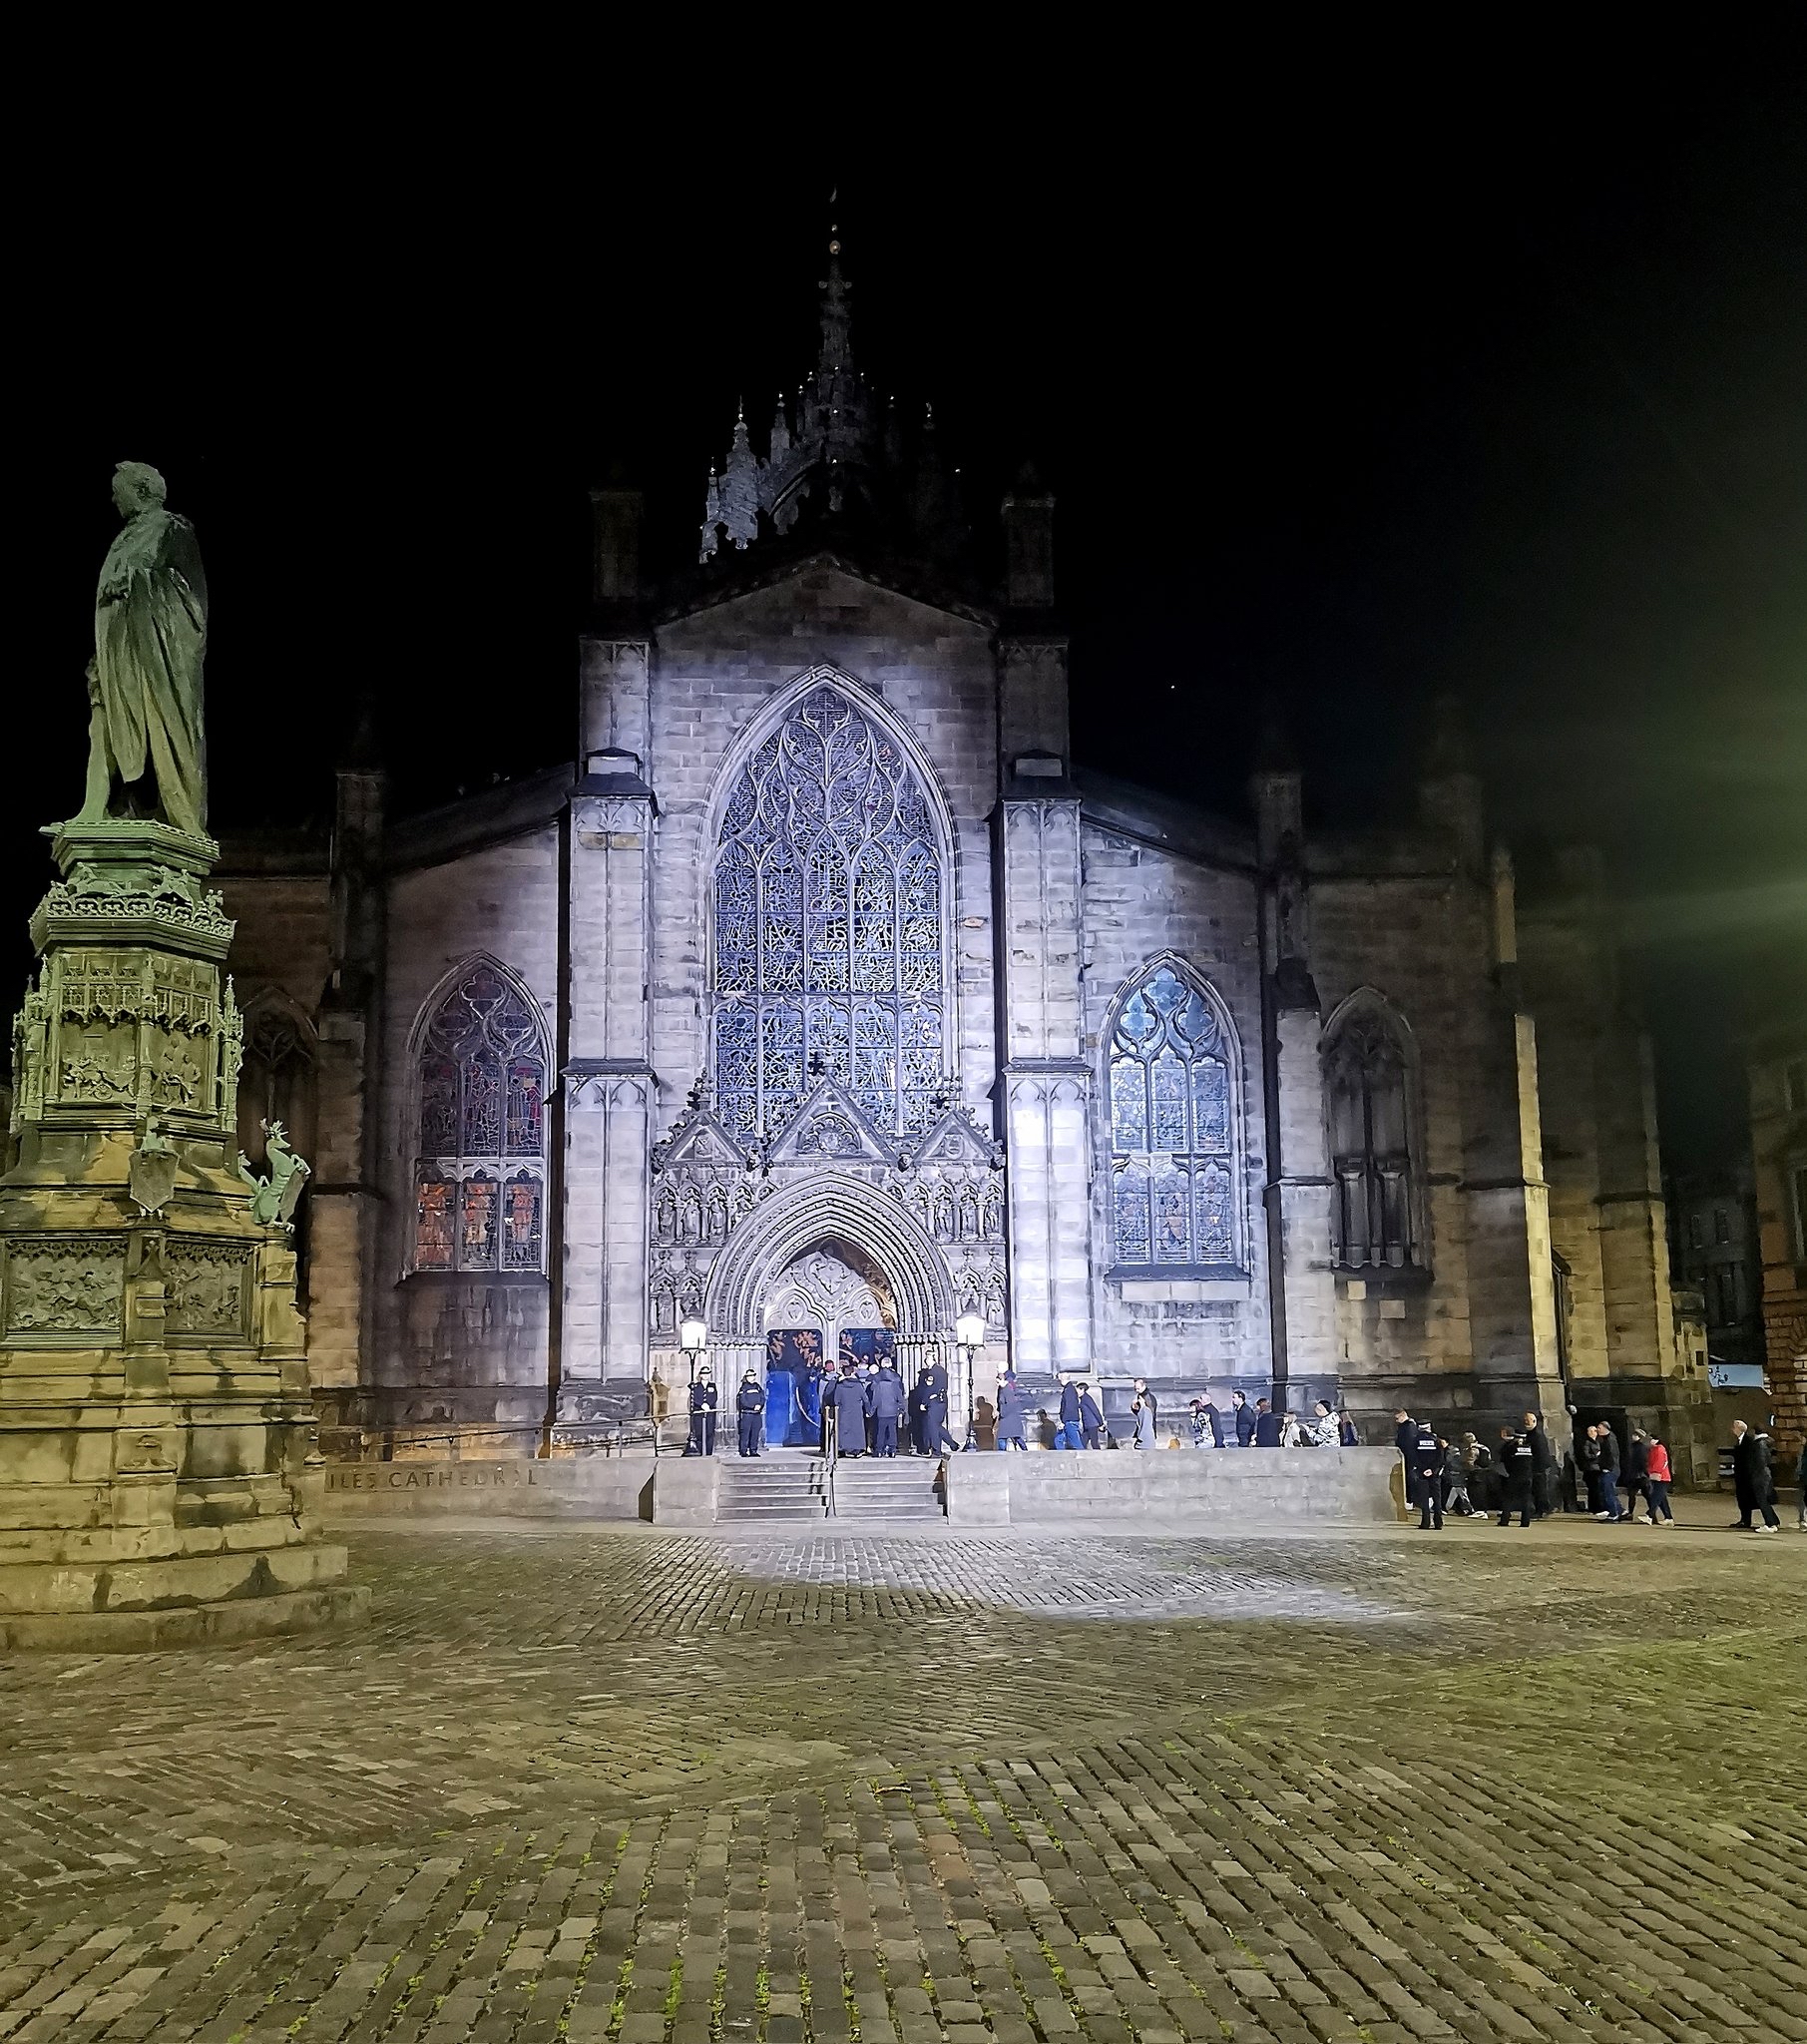 People filed into St Giles' Cathedral throughout the night to pay their respects to the Queen